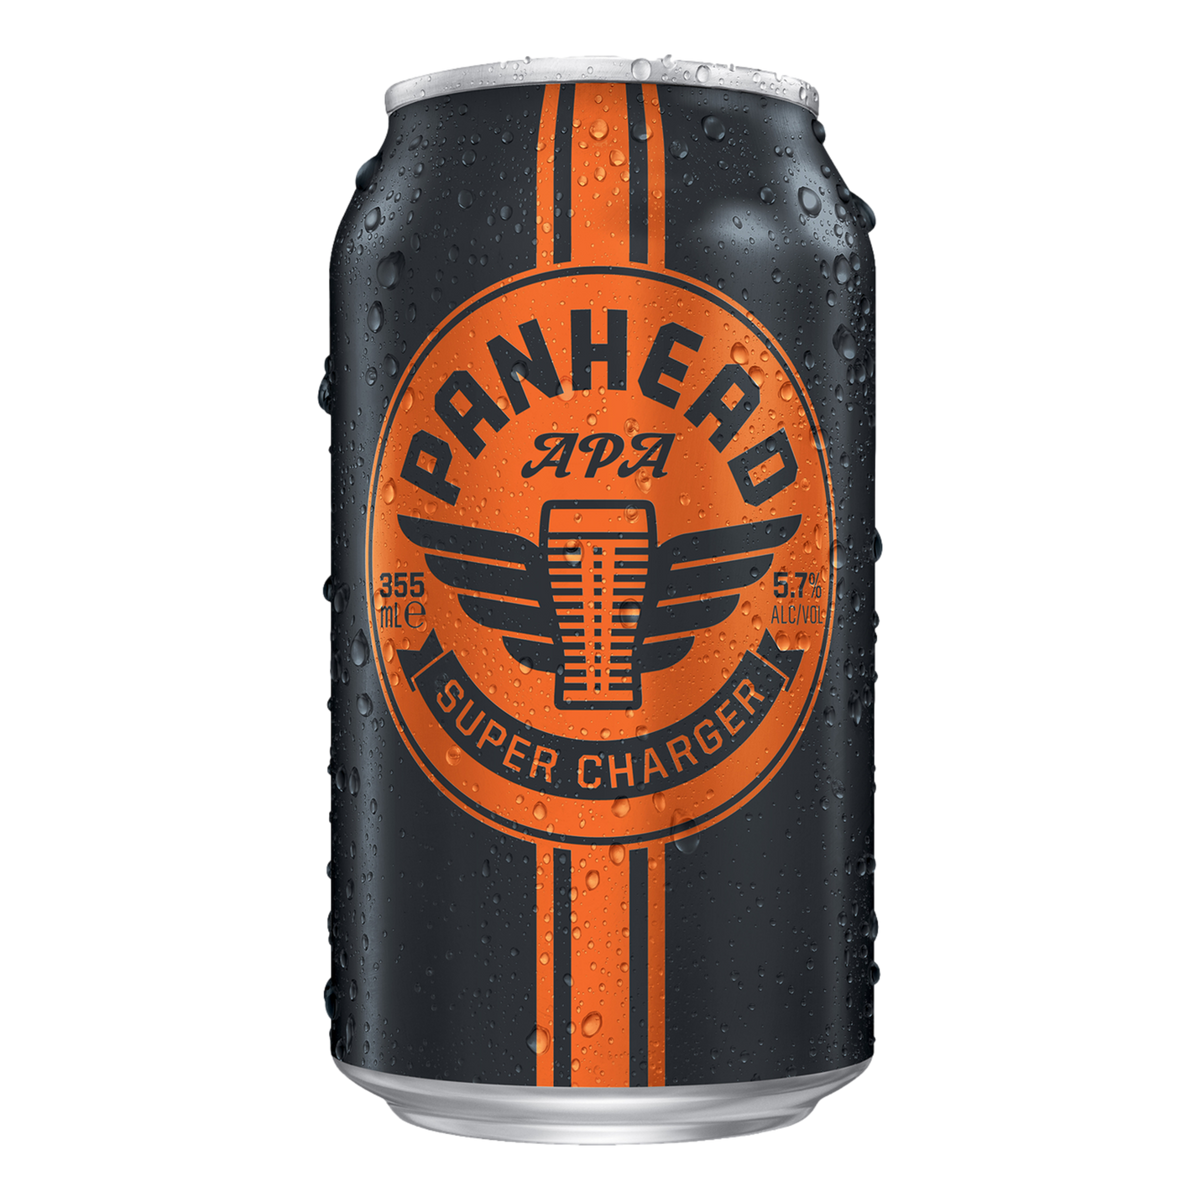 Panhead Super Charger American Pale Ale 375ml Can Case of 24